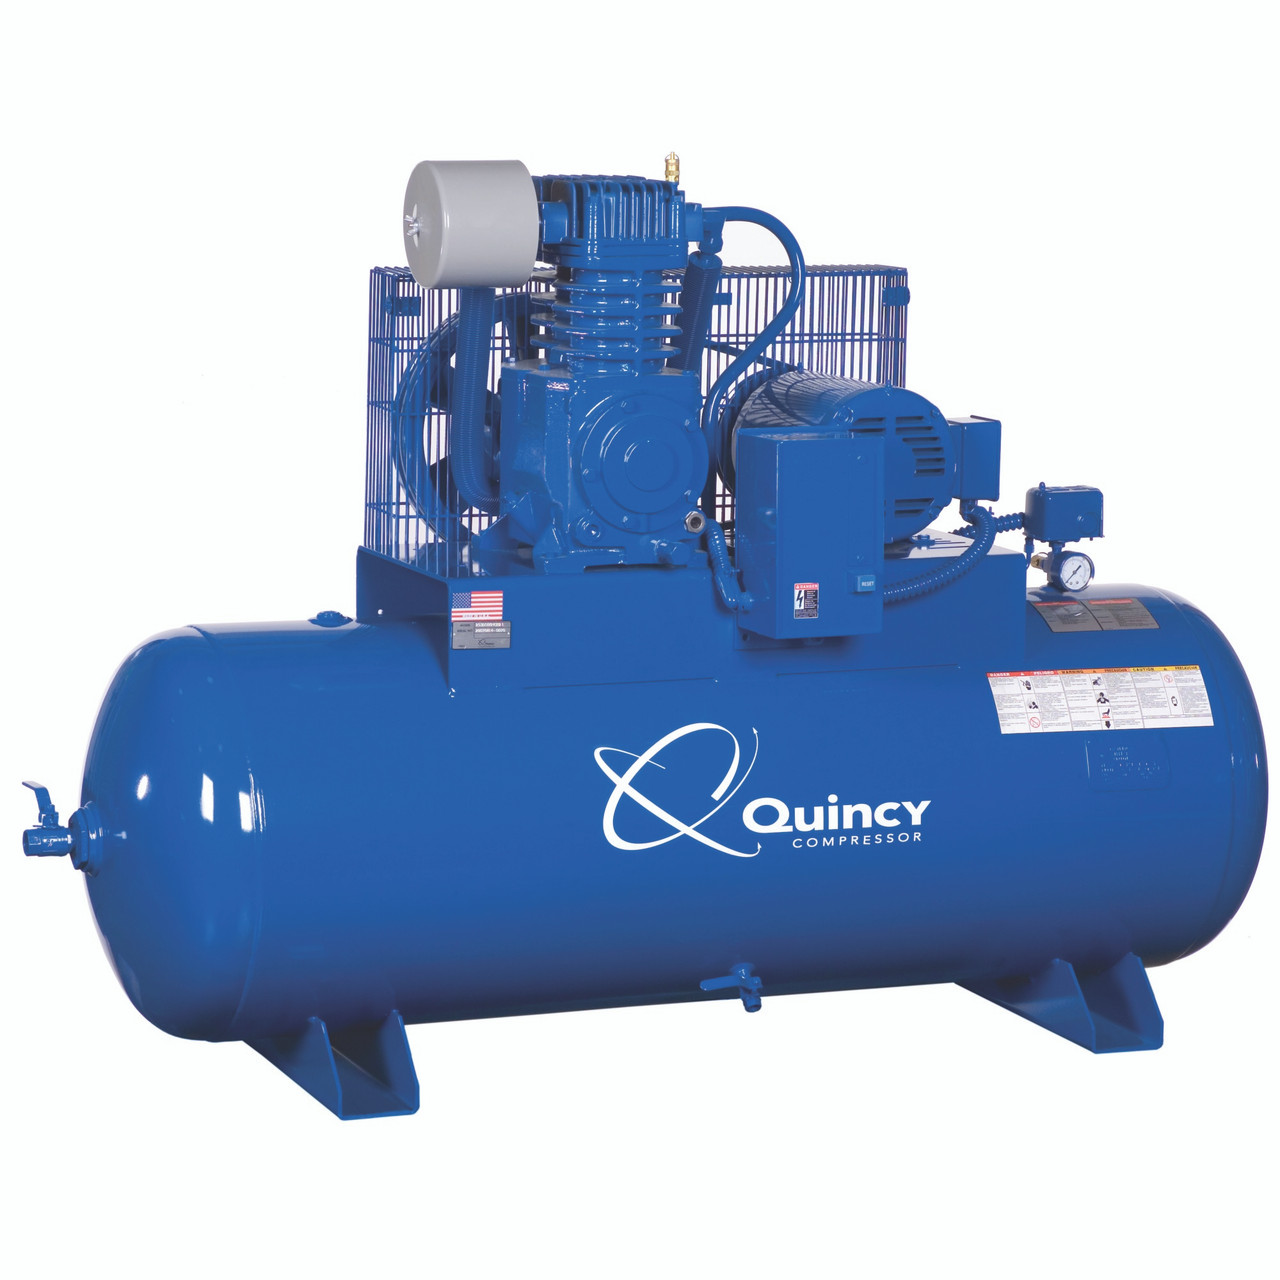 Quincy QP 353CS80HCB46 5 HP PRO, 460 Volt Three Phase, Two Stage, 80 Gallon Horizontal Air Compressor